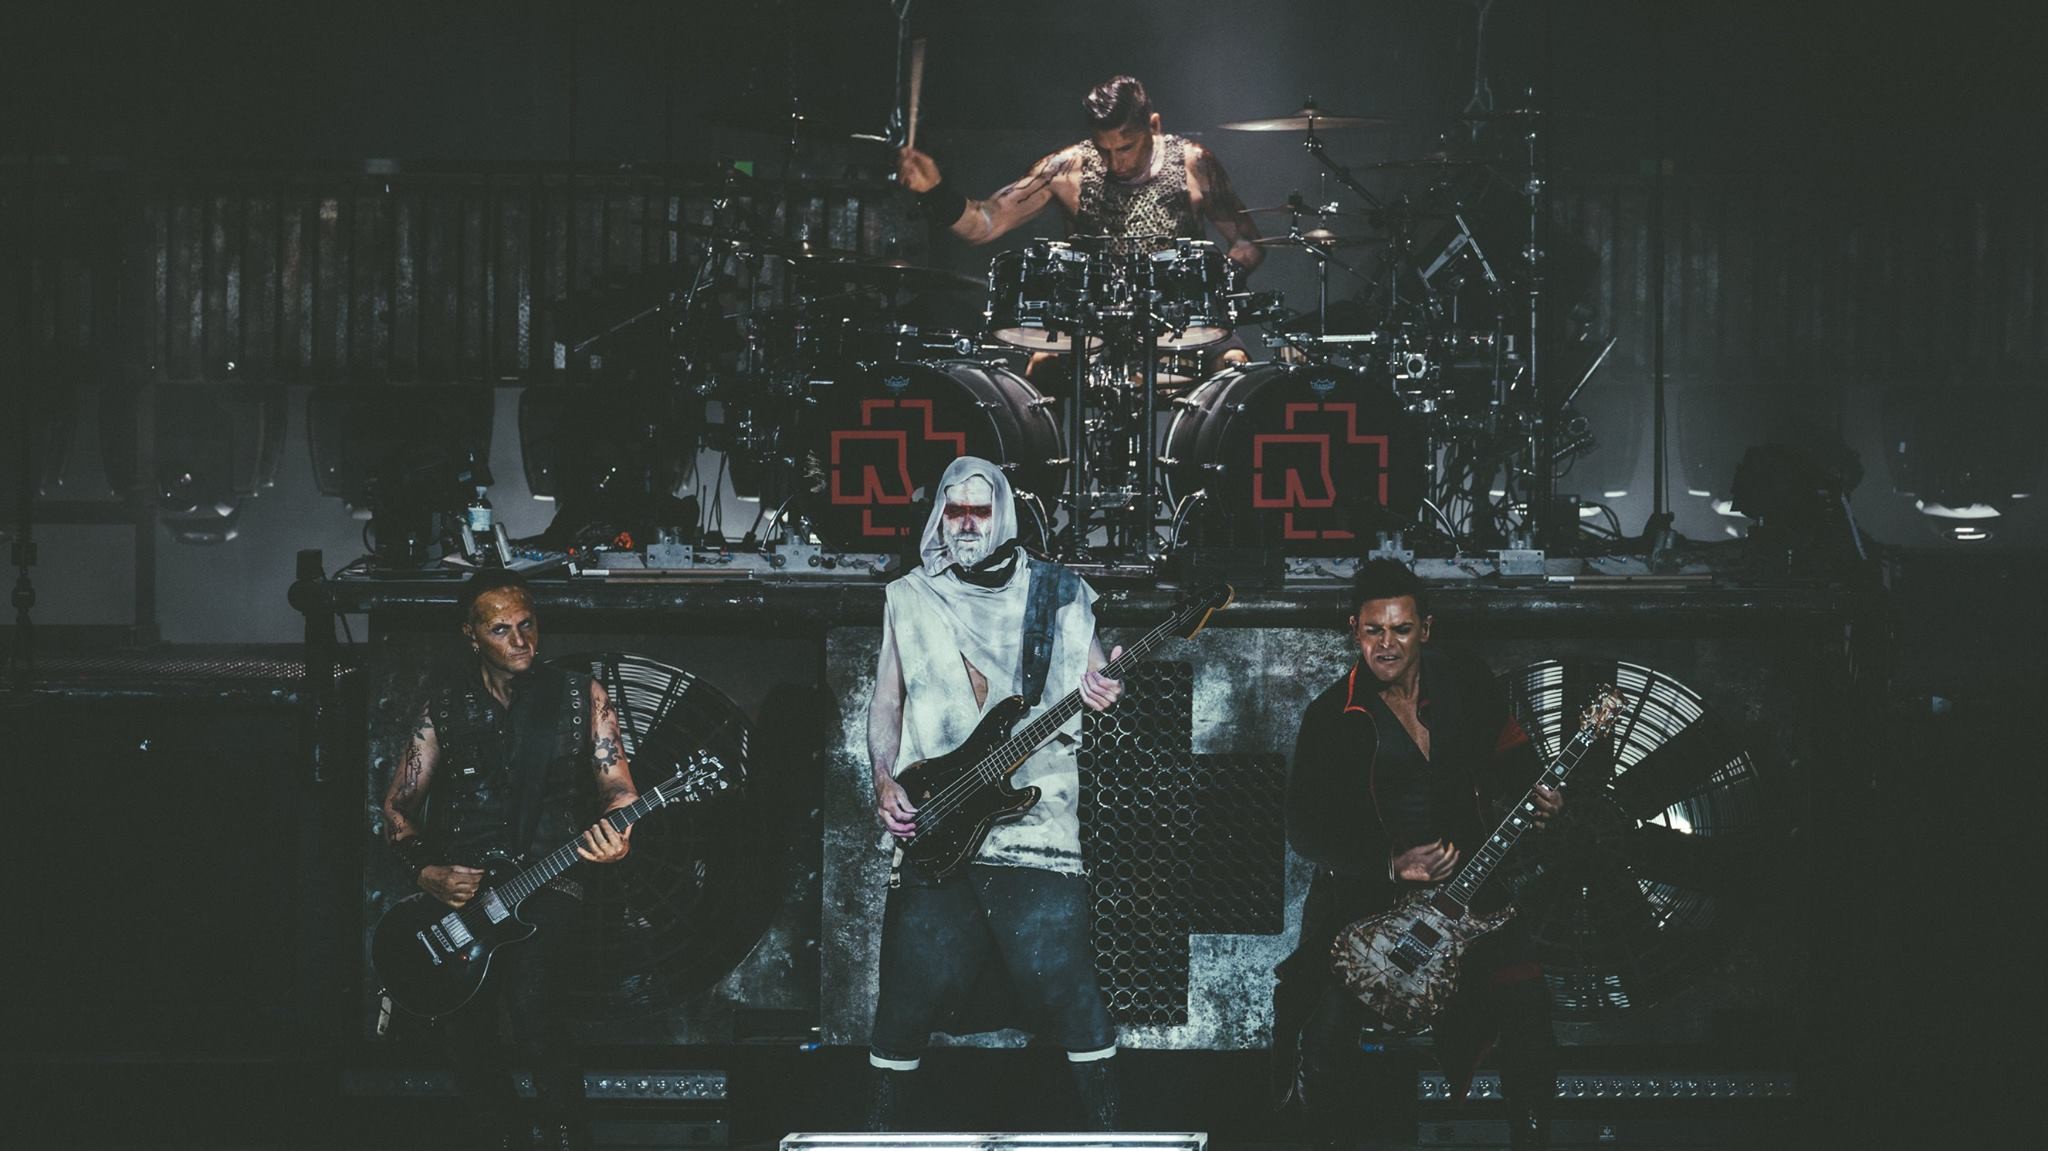 People 2048x1151 Rammstein metal band concerts band